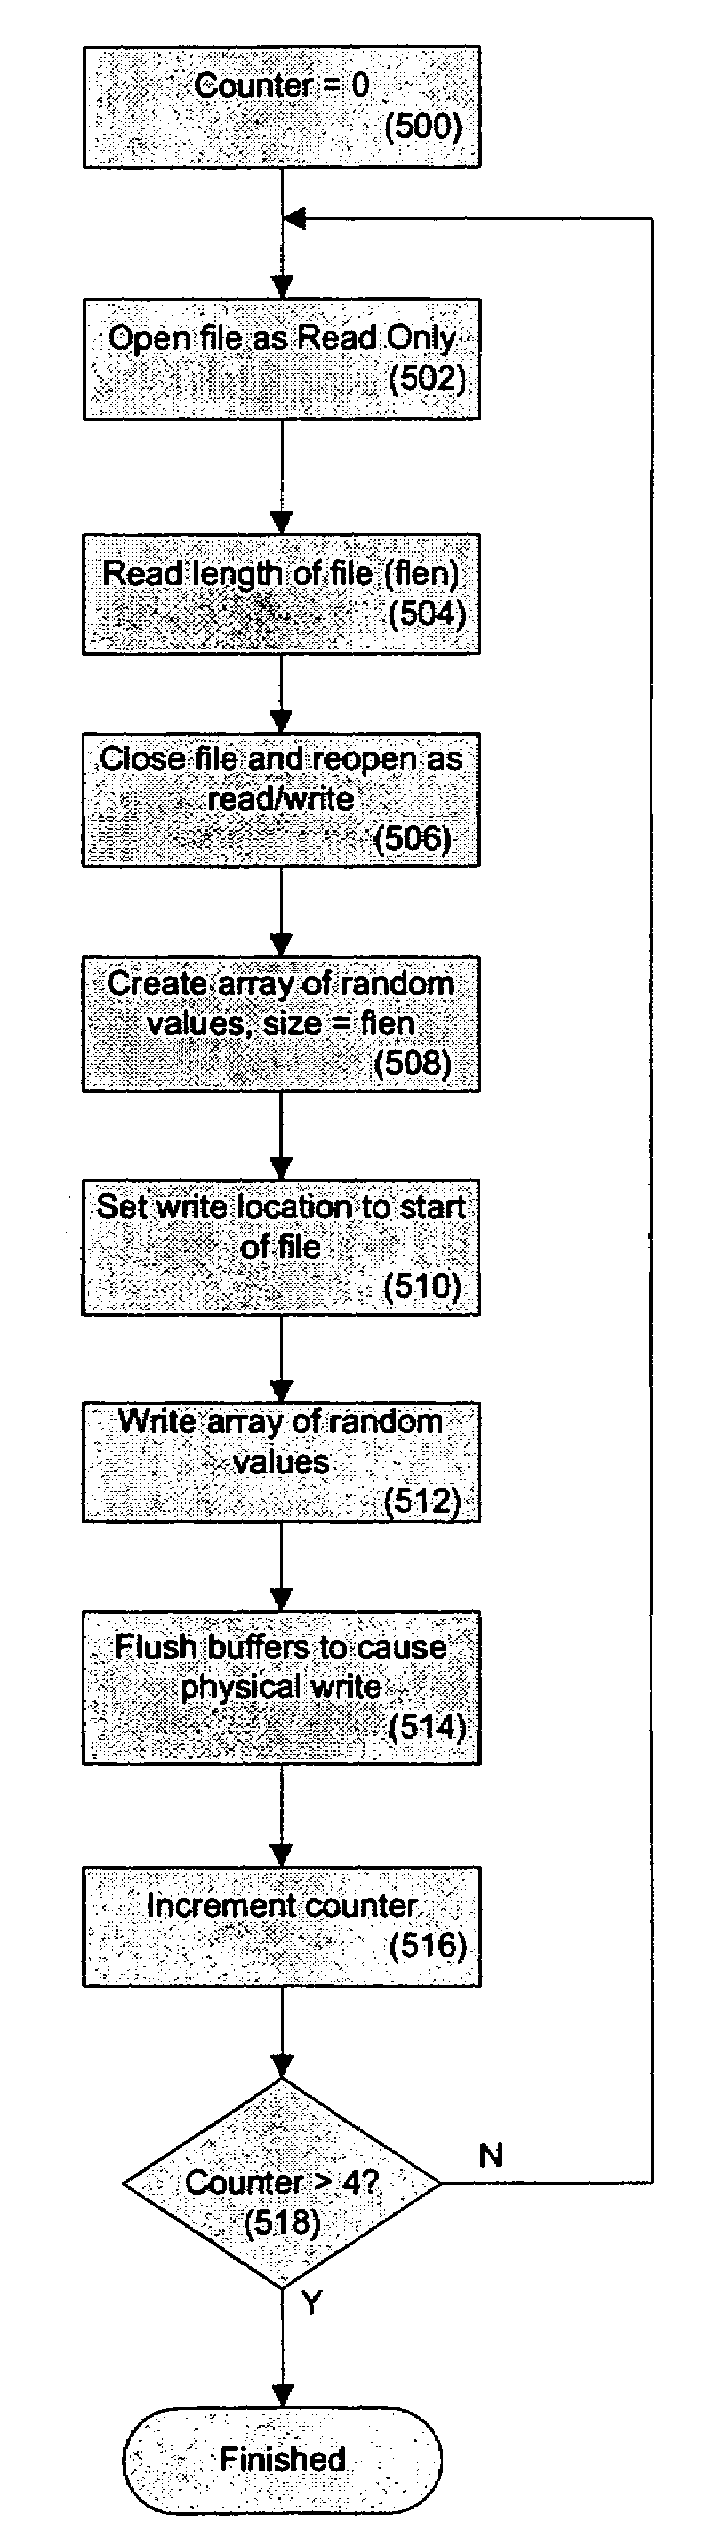 System and method for lost data destruction of electronic data stored on a portable electronic device which communicates with servers that are inside of and outside of a firewall